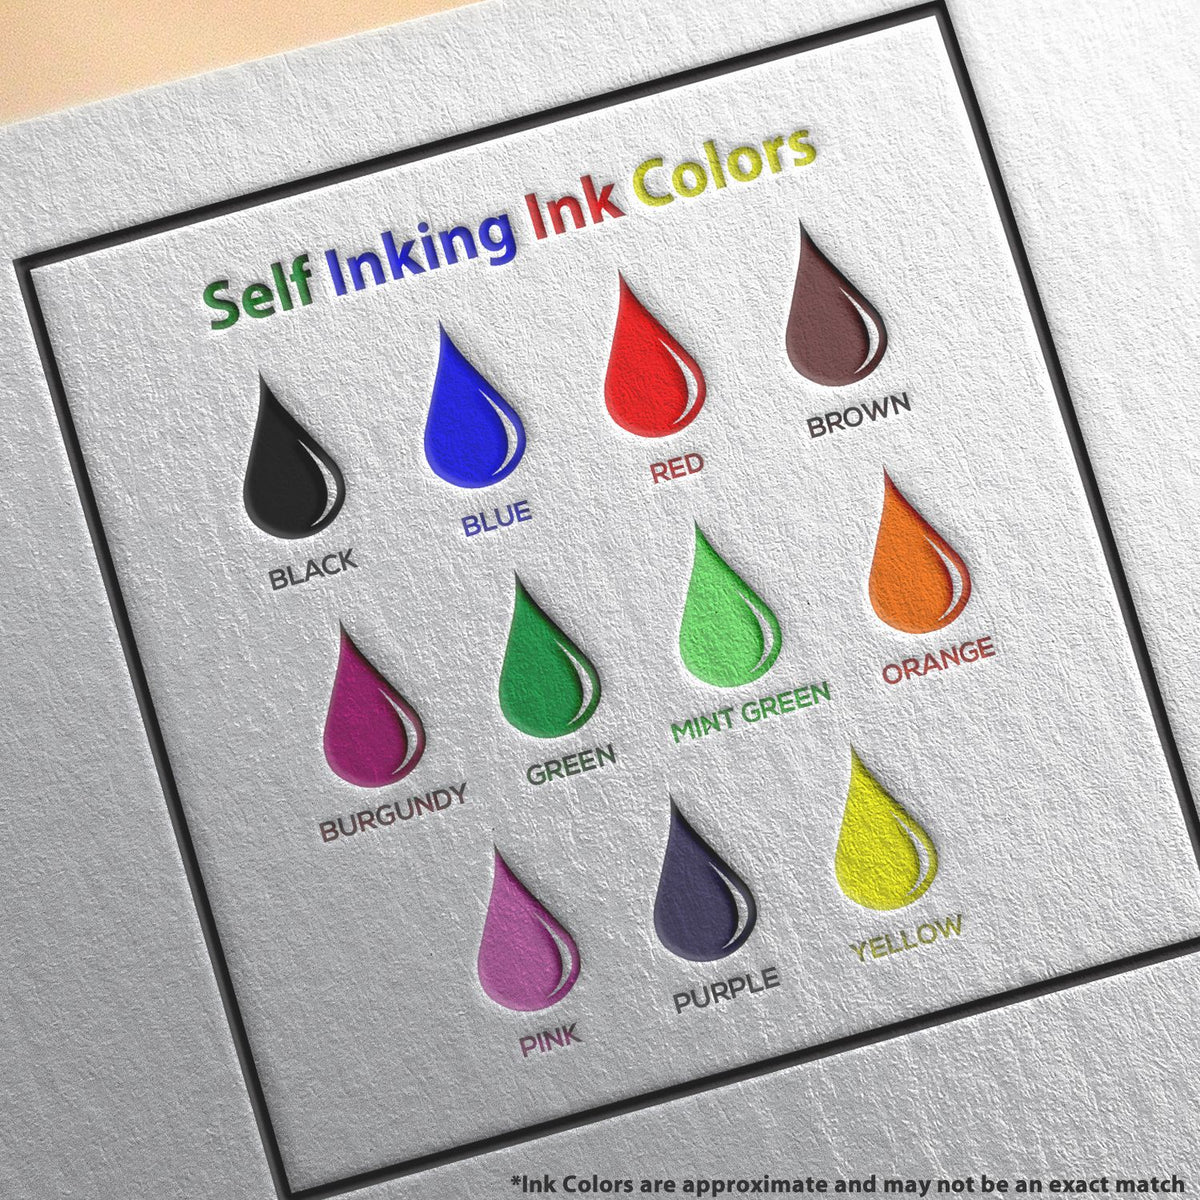 A picture showing the different ink colors or hues available for the Self-Inking Wyoming Landscape Architect Stamp product.